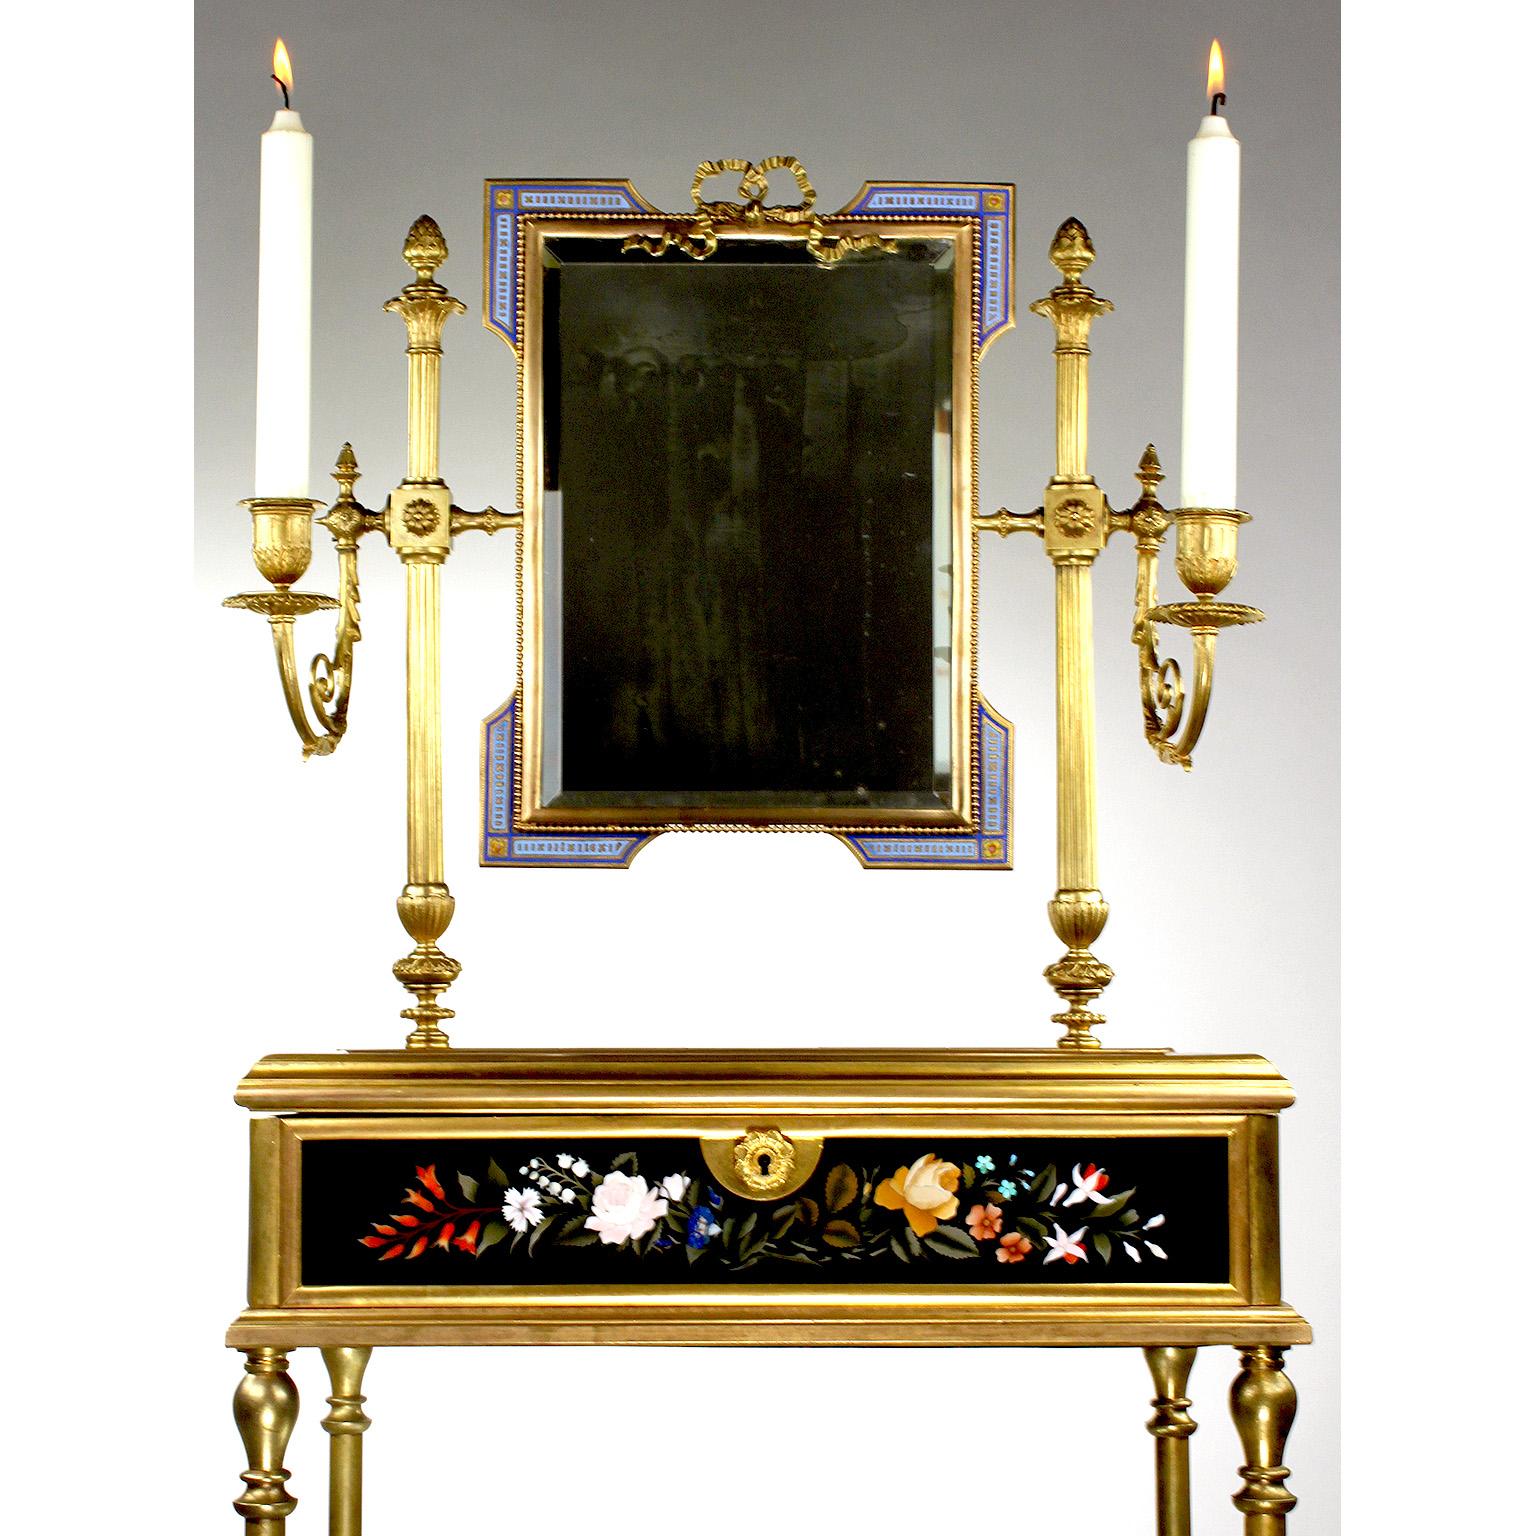 French 19th Century Gilt-Bronze and Pietra Dura Vanity Stand, Attr. Tahan, Paris For Sale 2